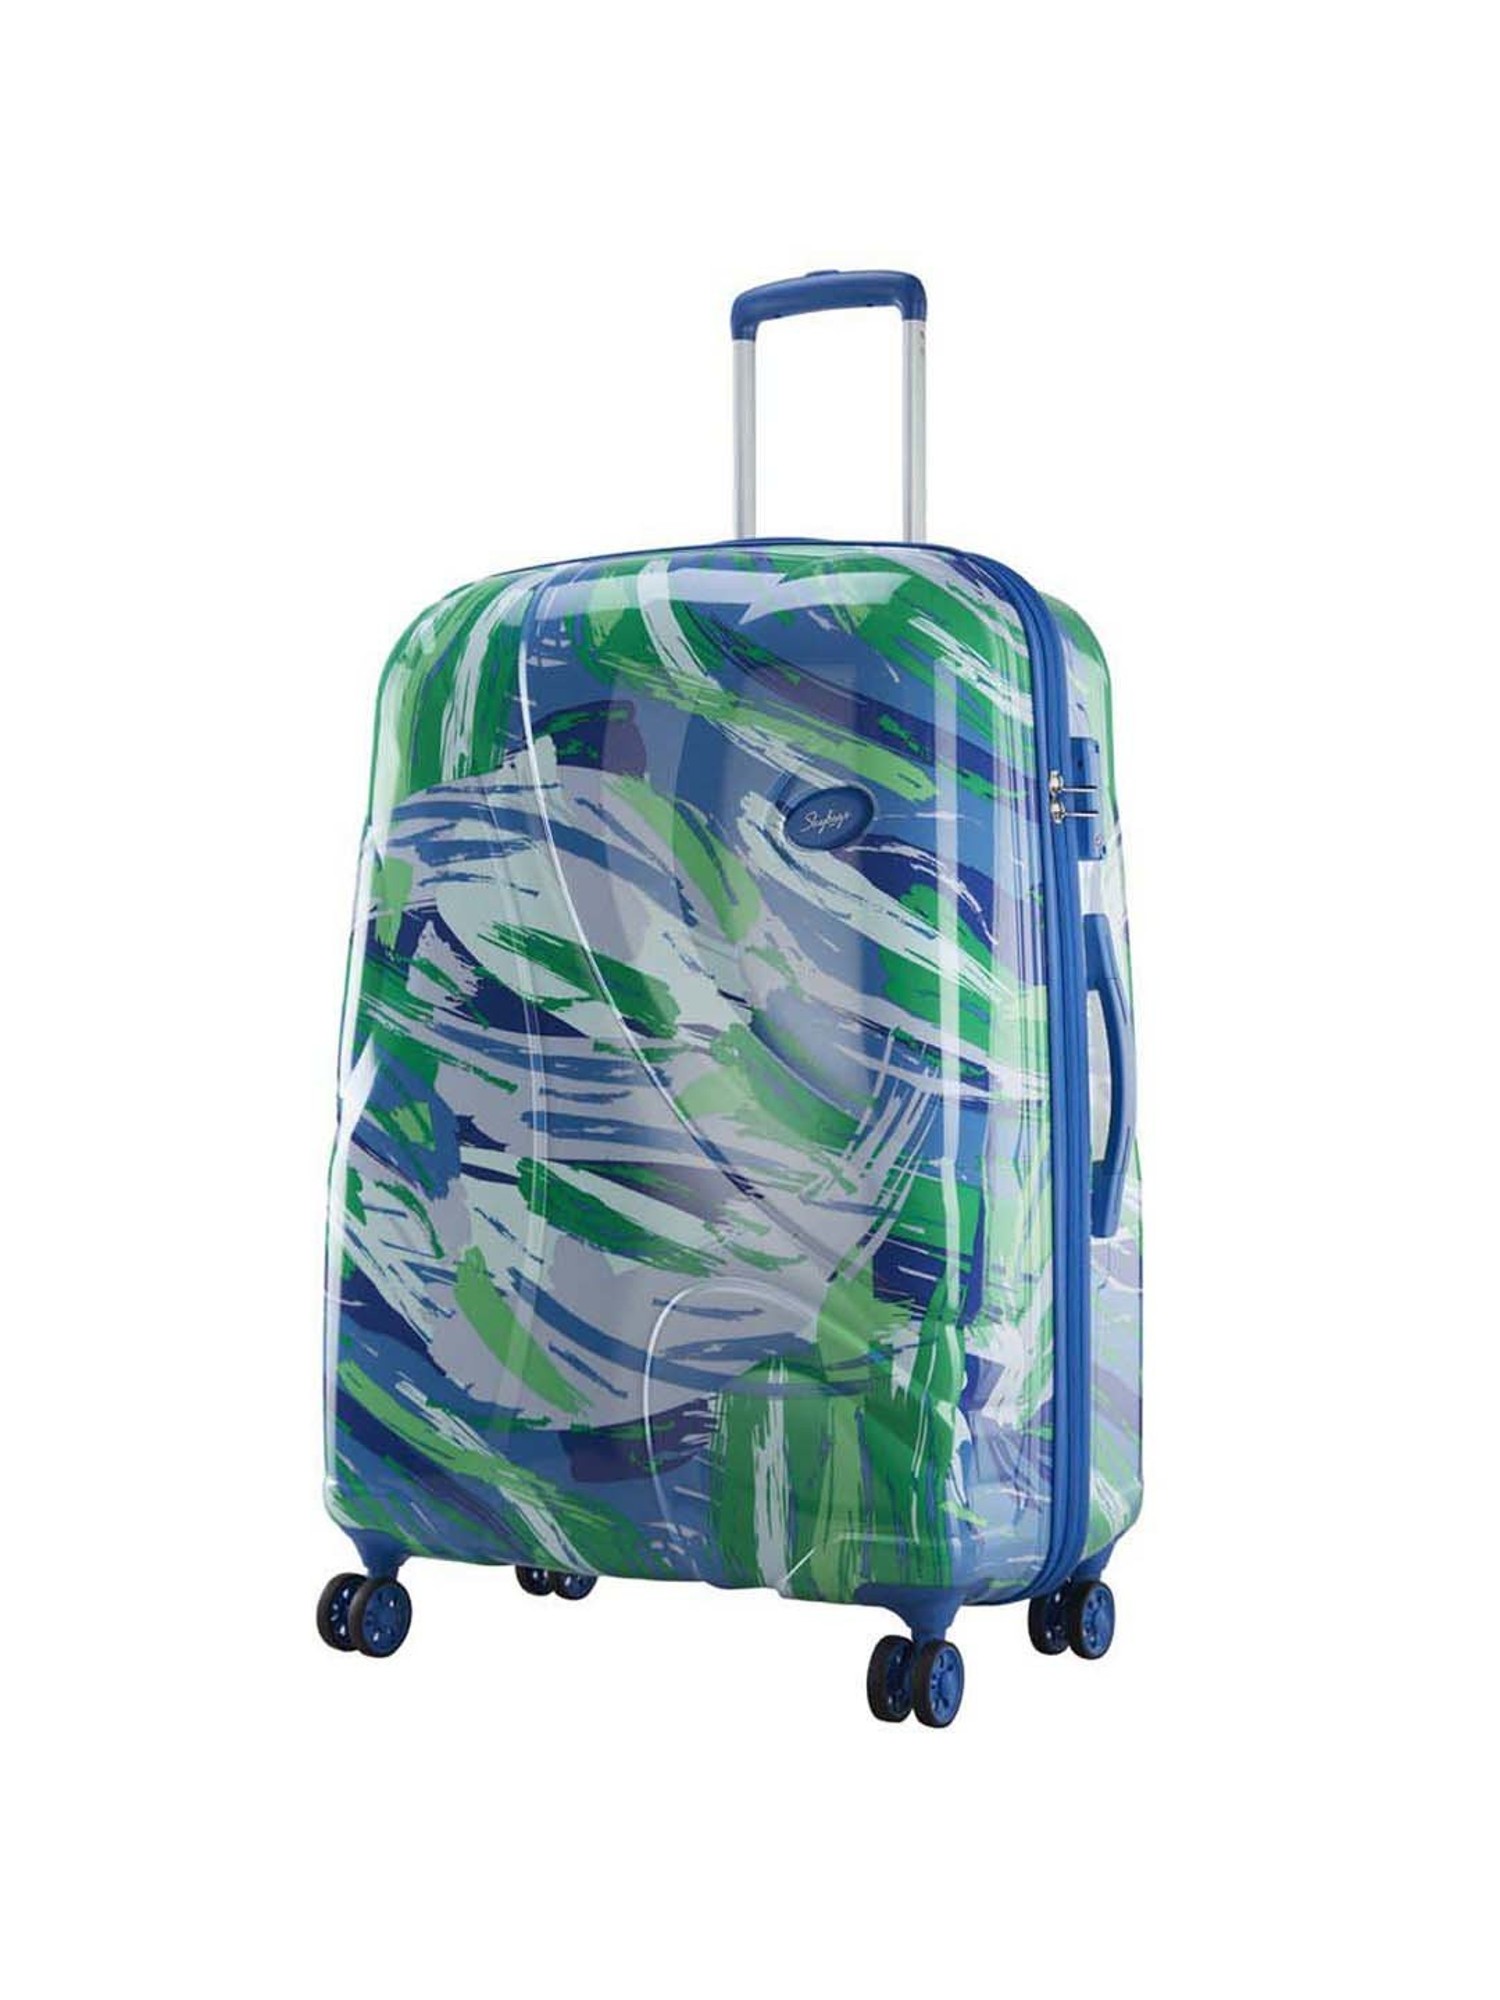 RT MINI INFINITY LAWN BOWLS TROLLEY BAG *NEWEST ARRIVAL*